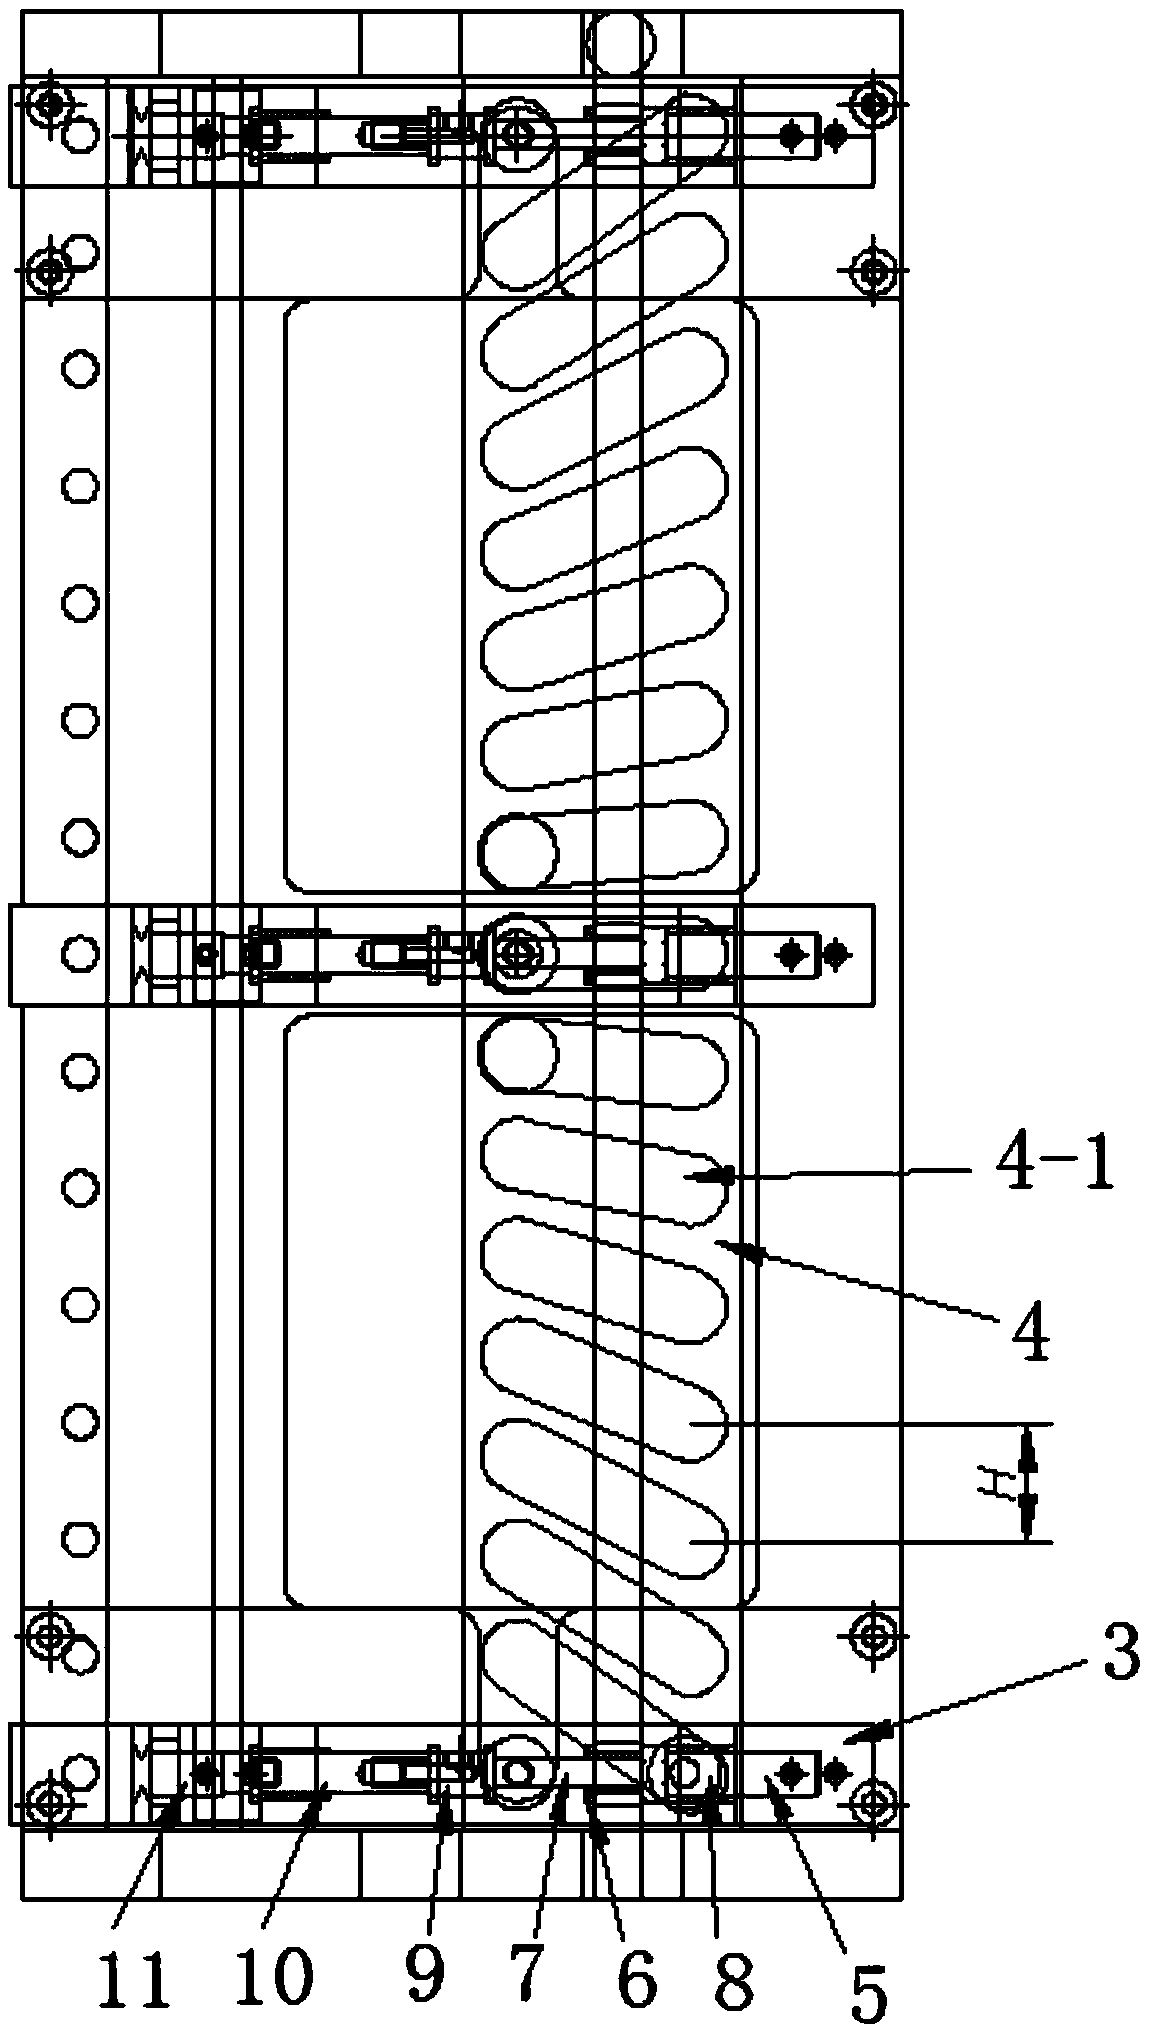 An automatic spacing mechanism for cylindrical batteries